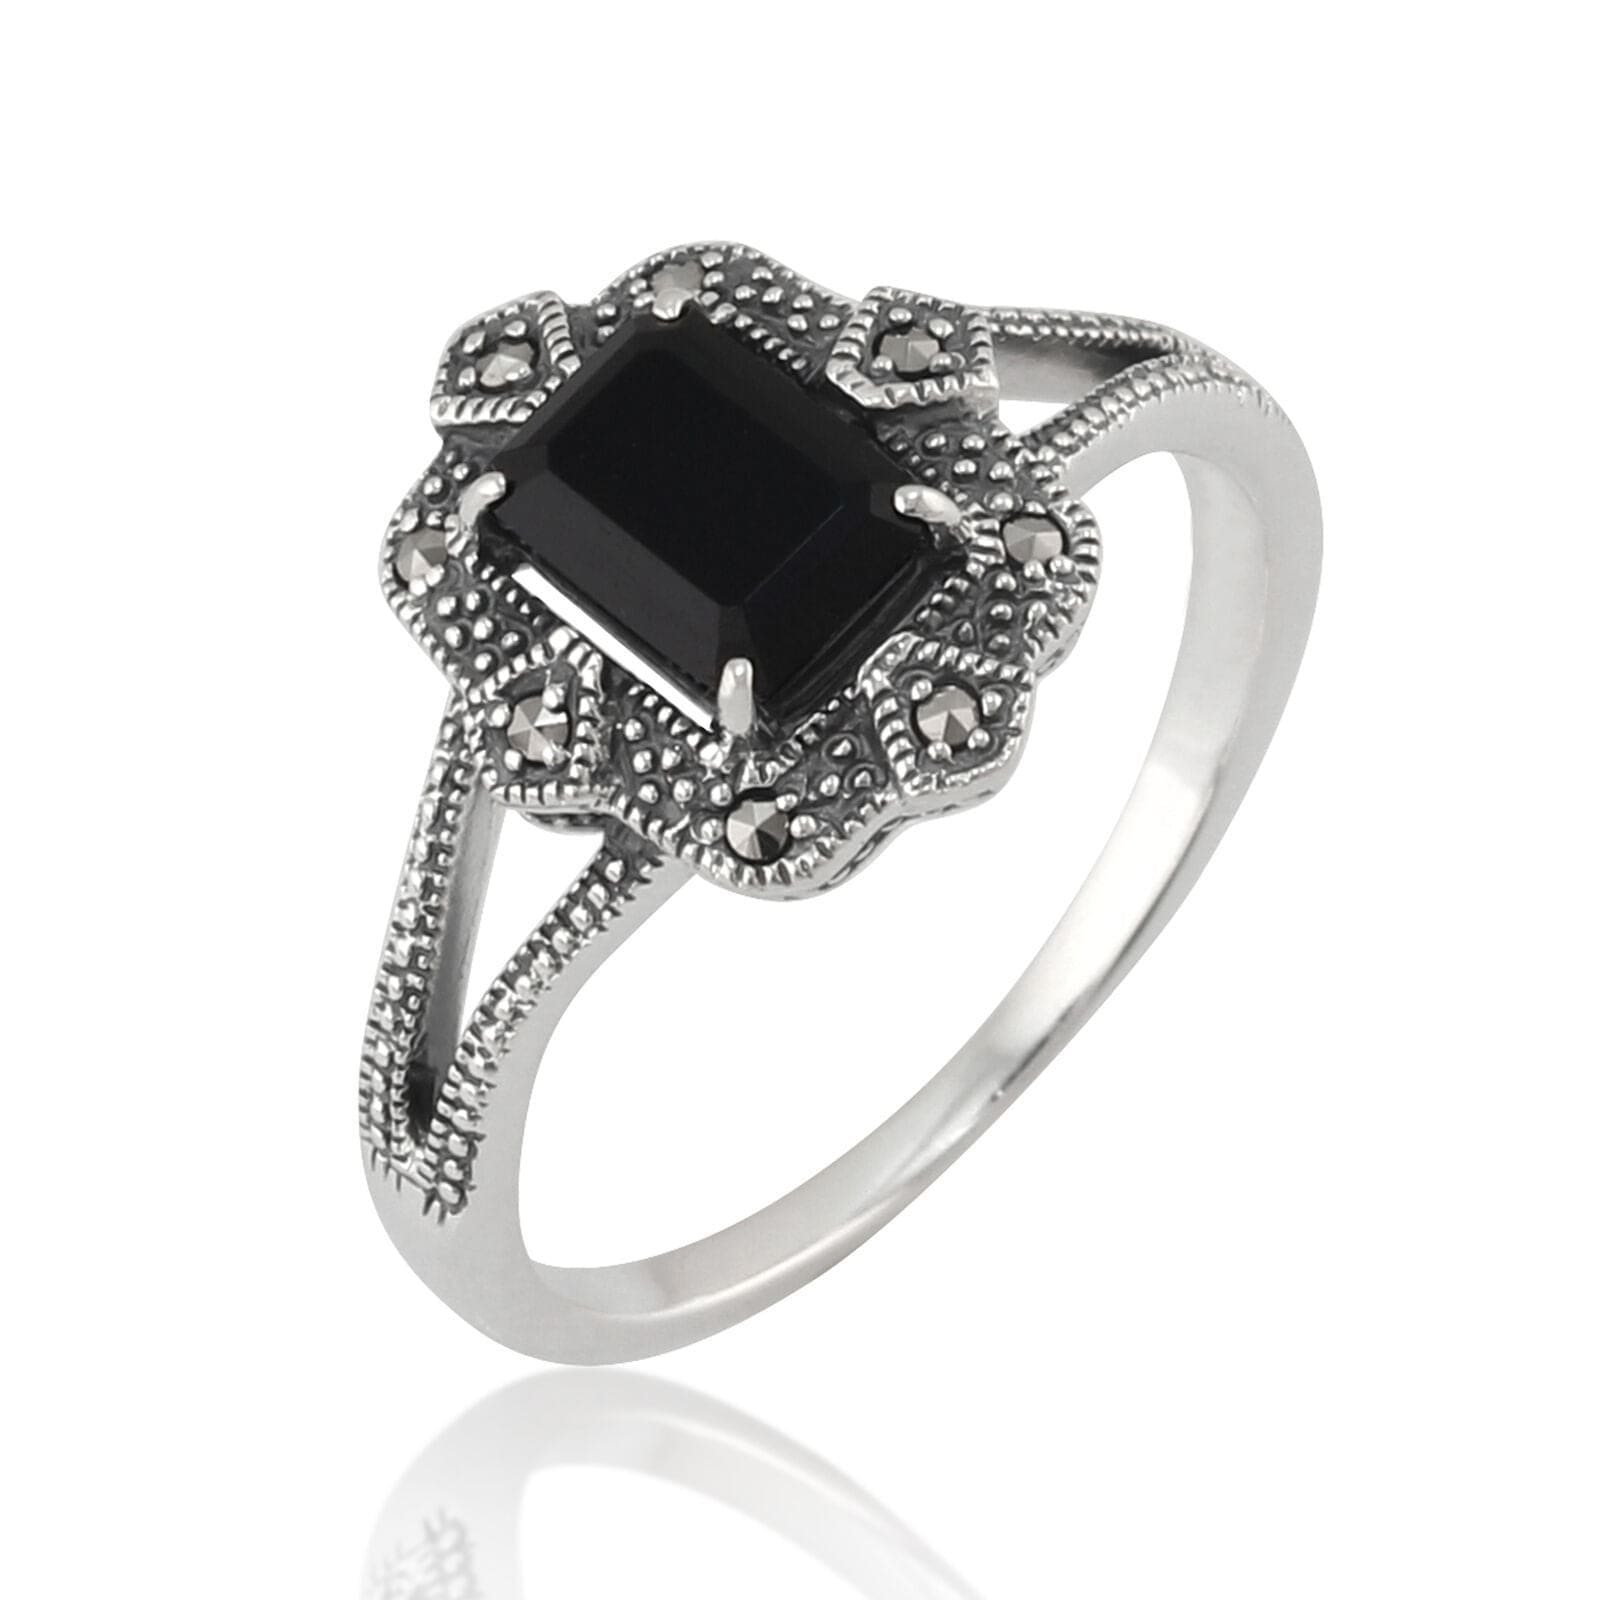 214R479001925 Art Deco Style Baguette Black Spinel & Marcasite Ring in Silver 3